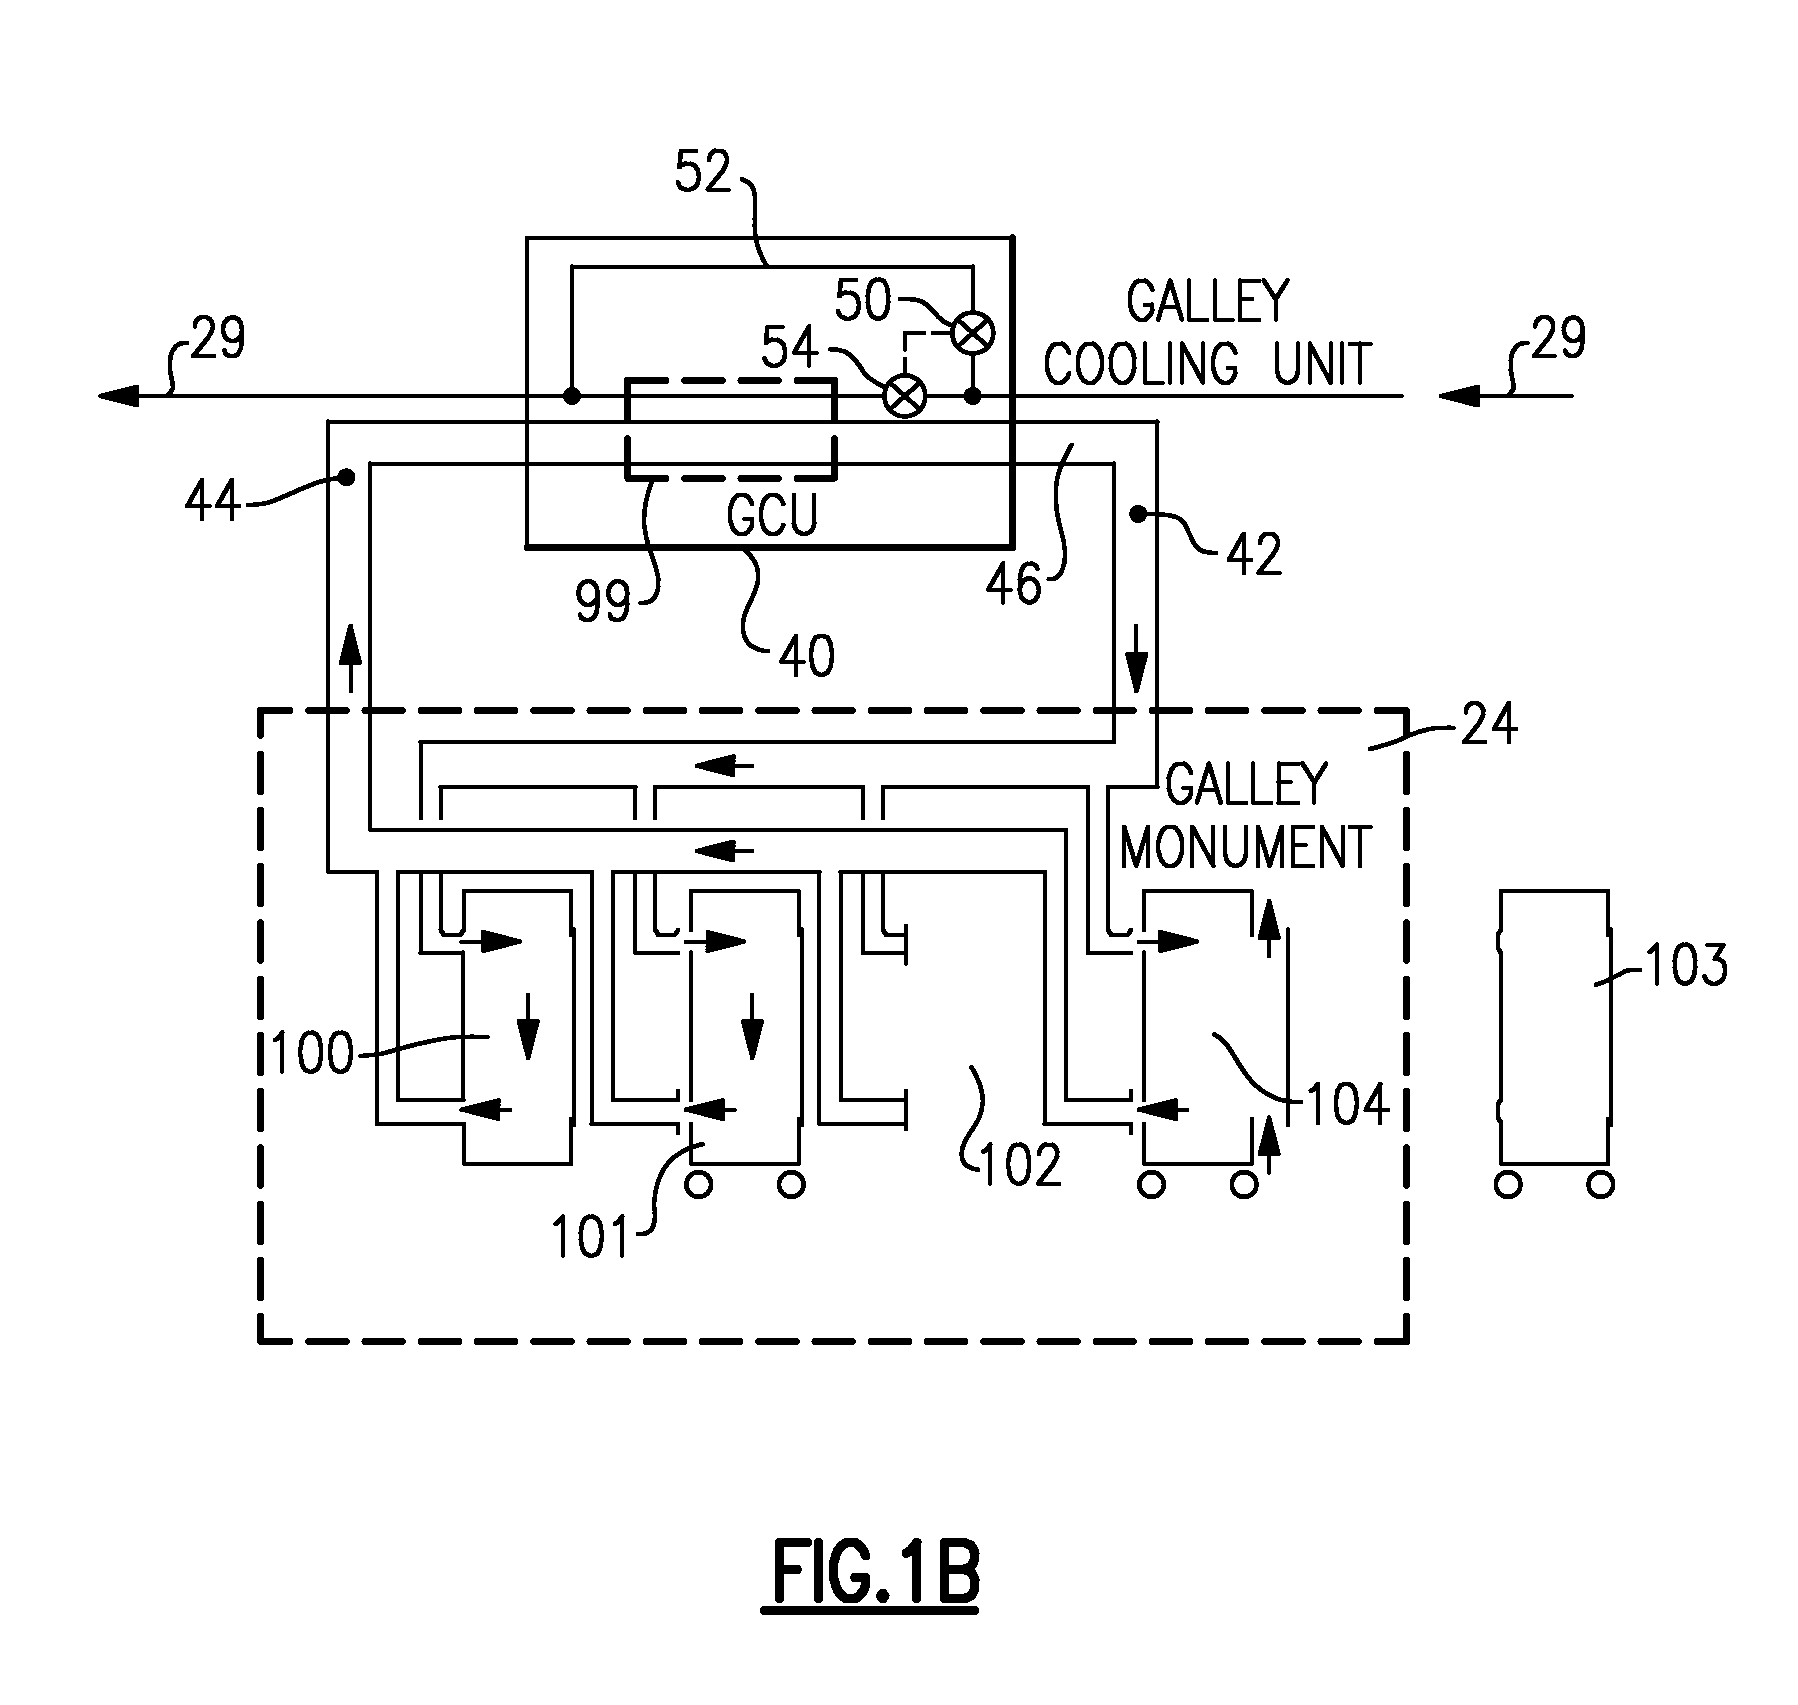 Compartment cooling loss identification for efficient system operation